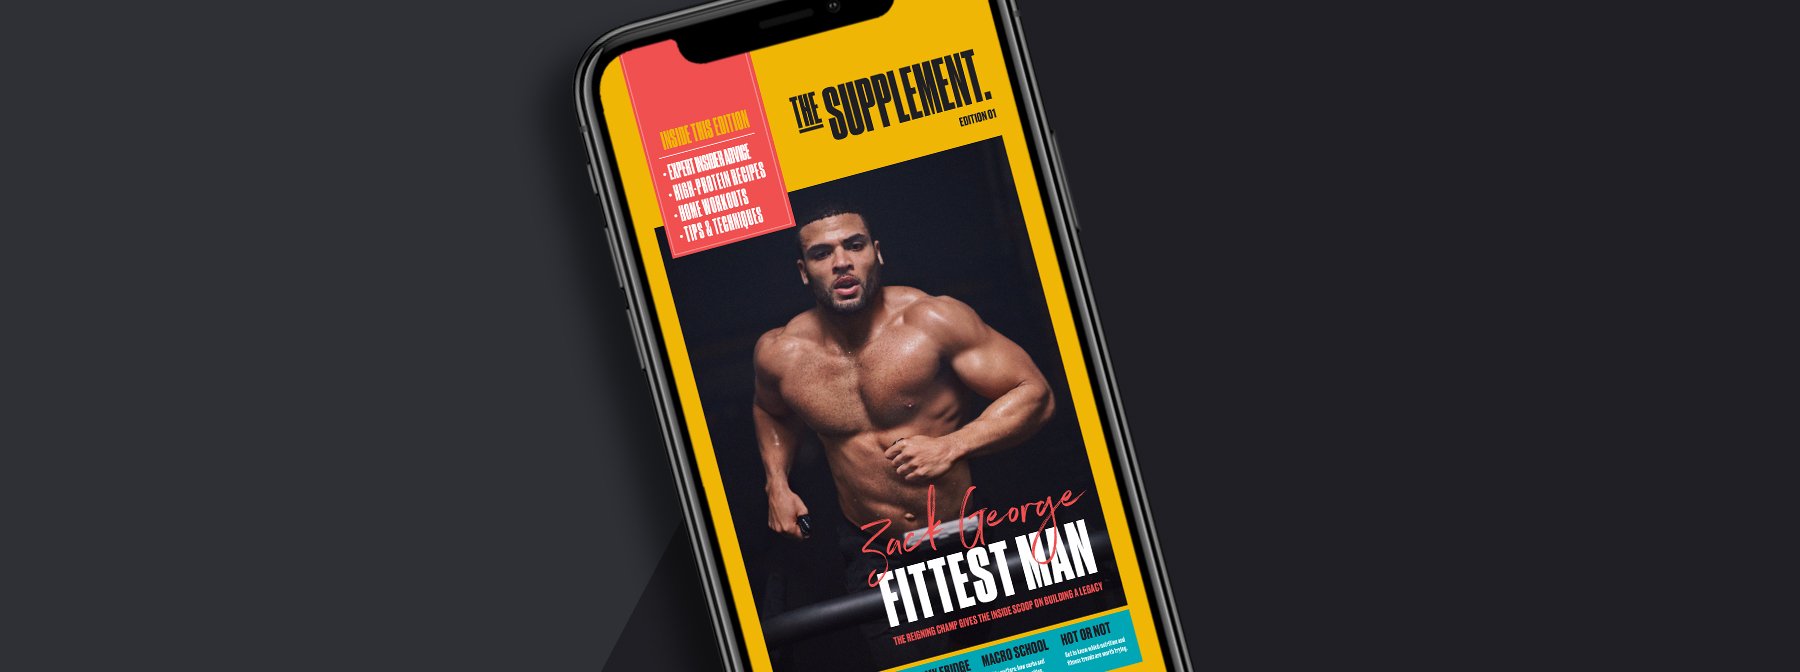 Introducing The Supplement — The Ultimate Fitness Magazine